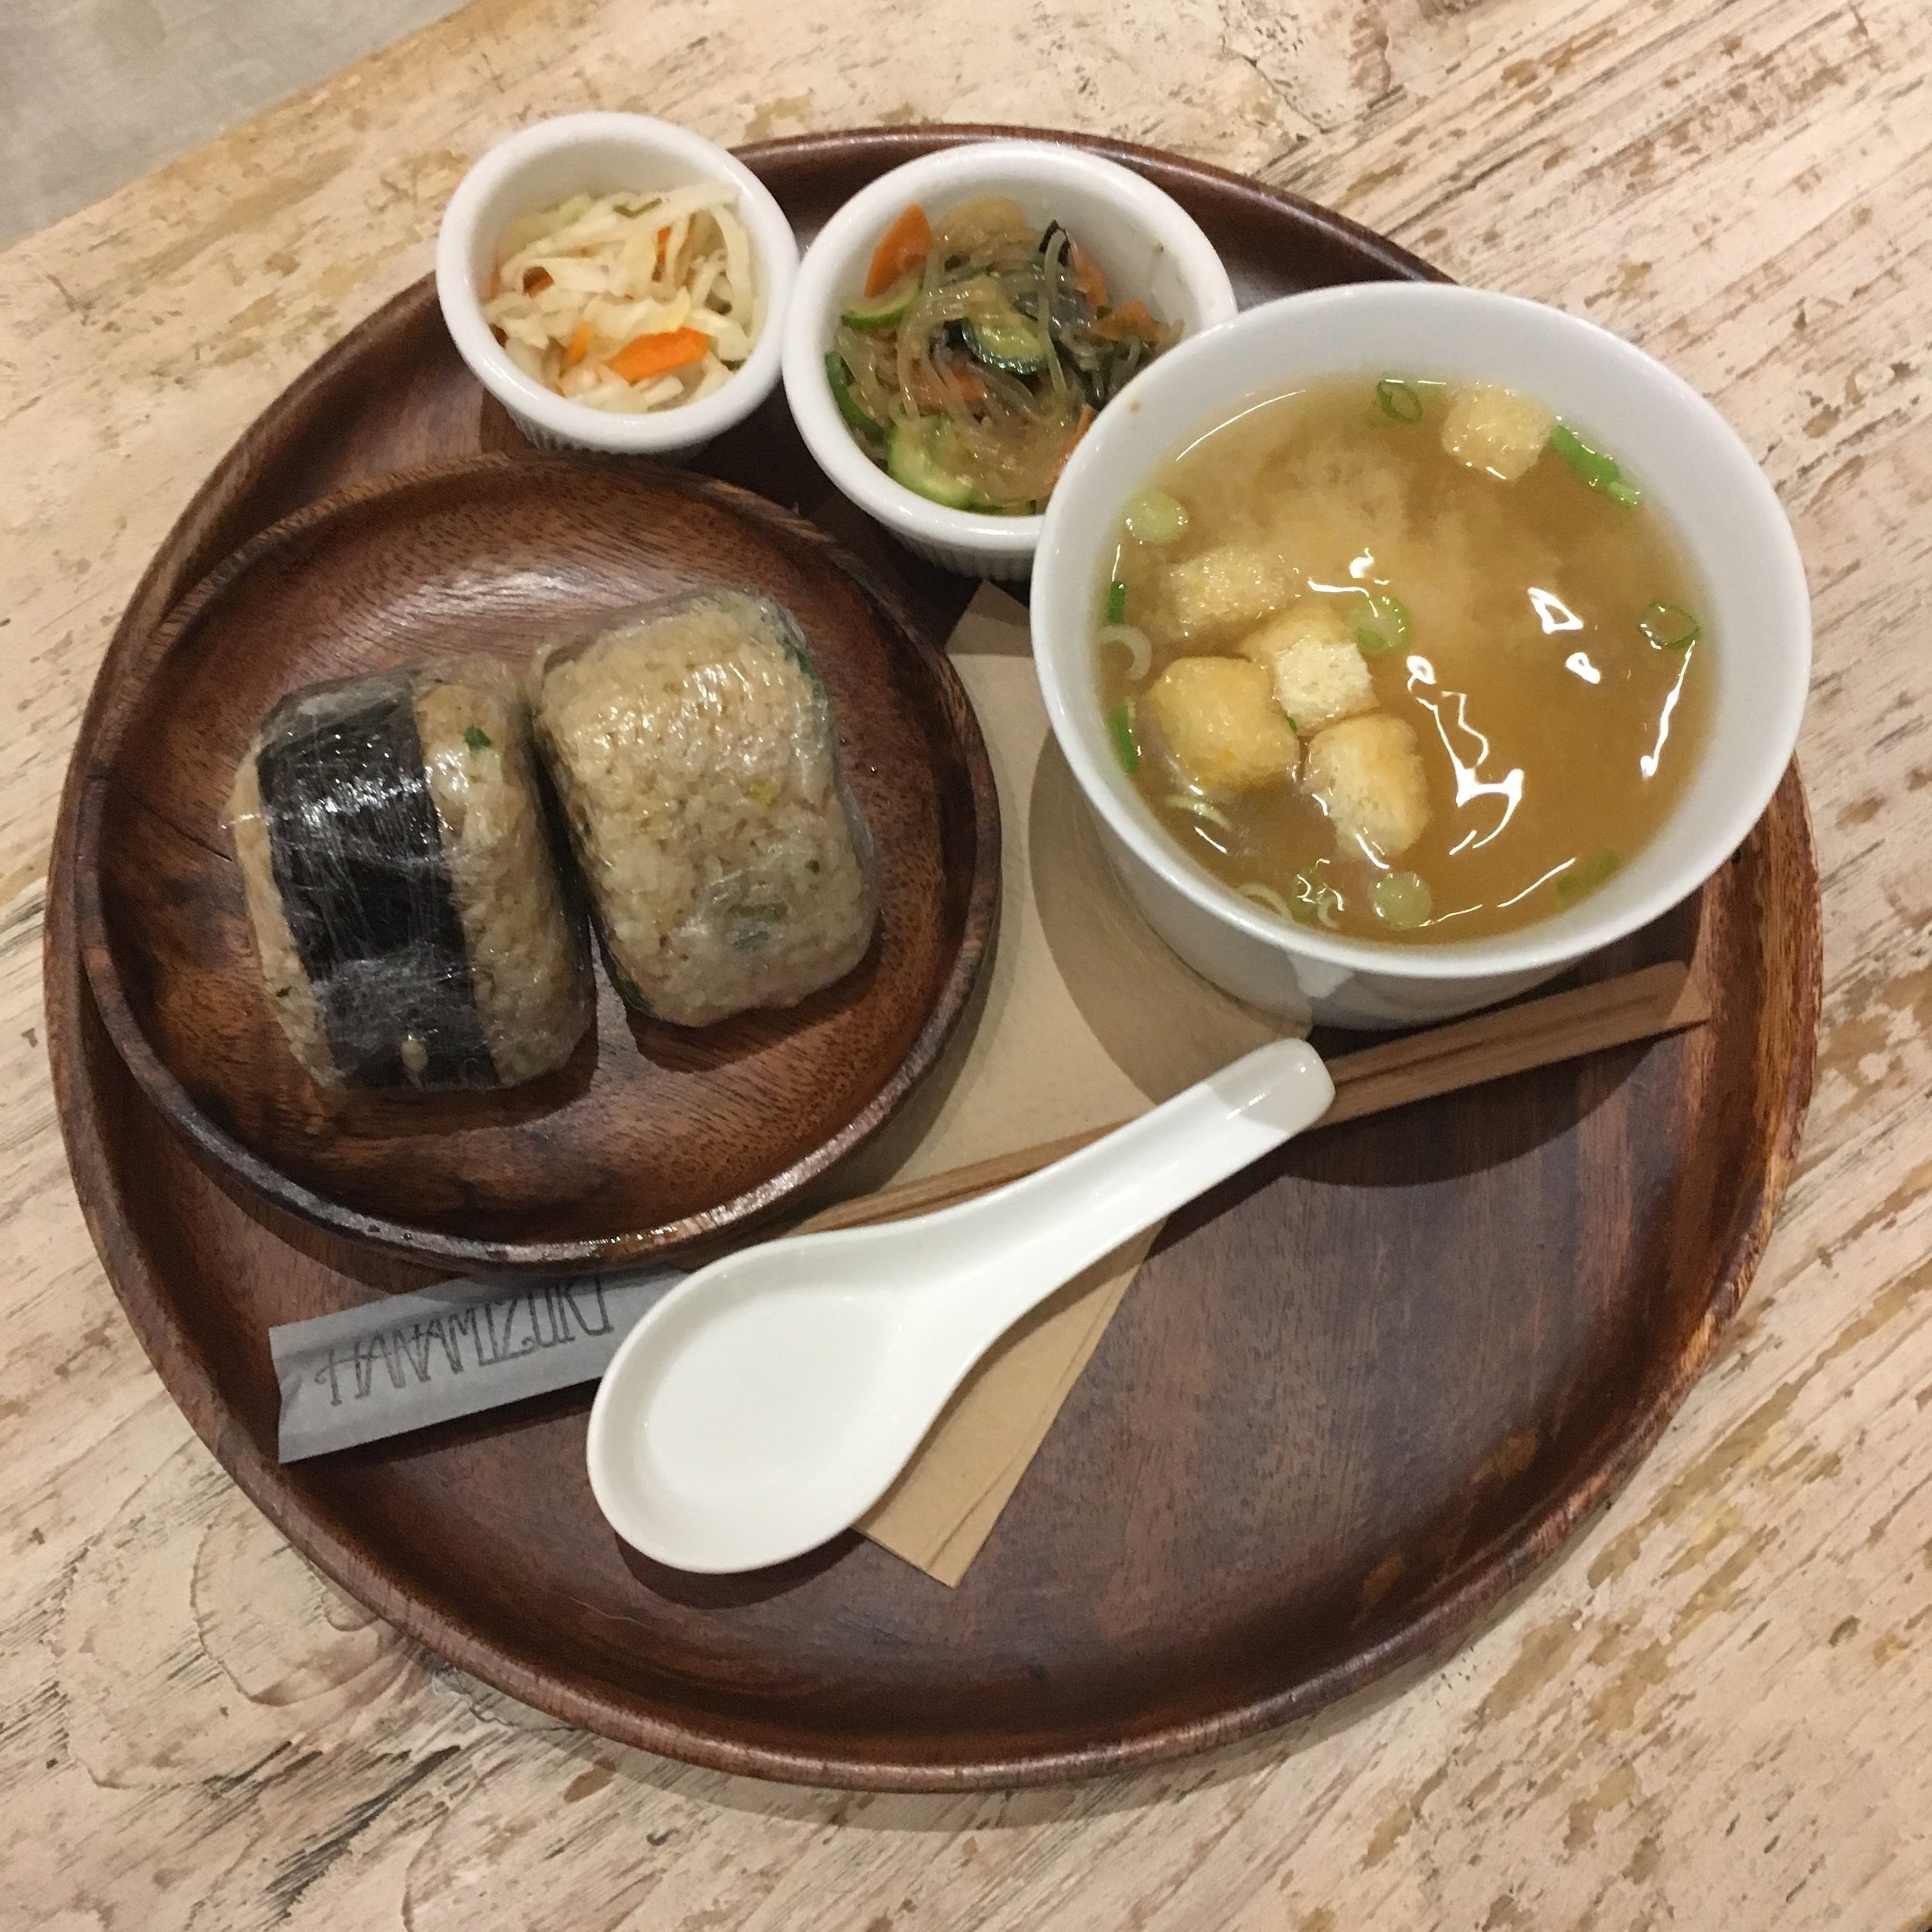 Calming lunch special ($13)